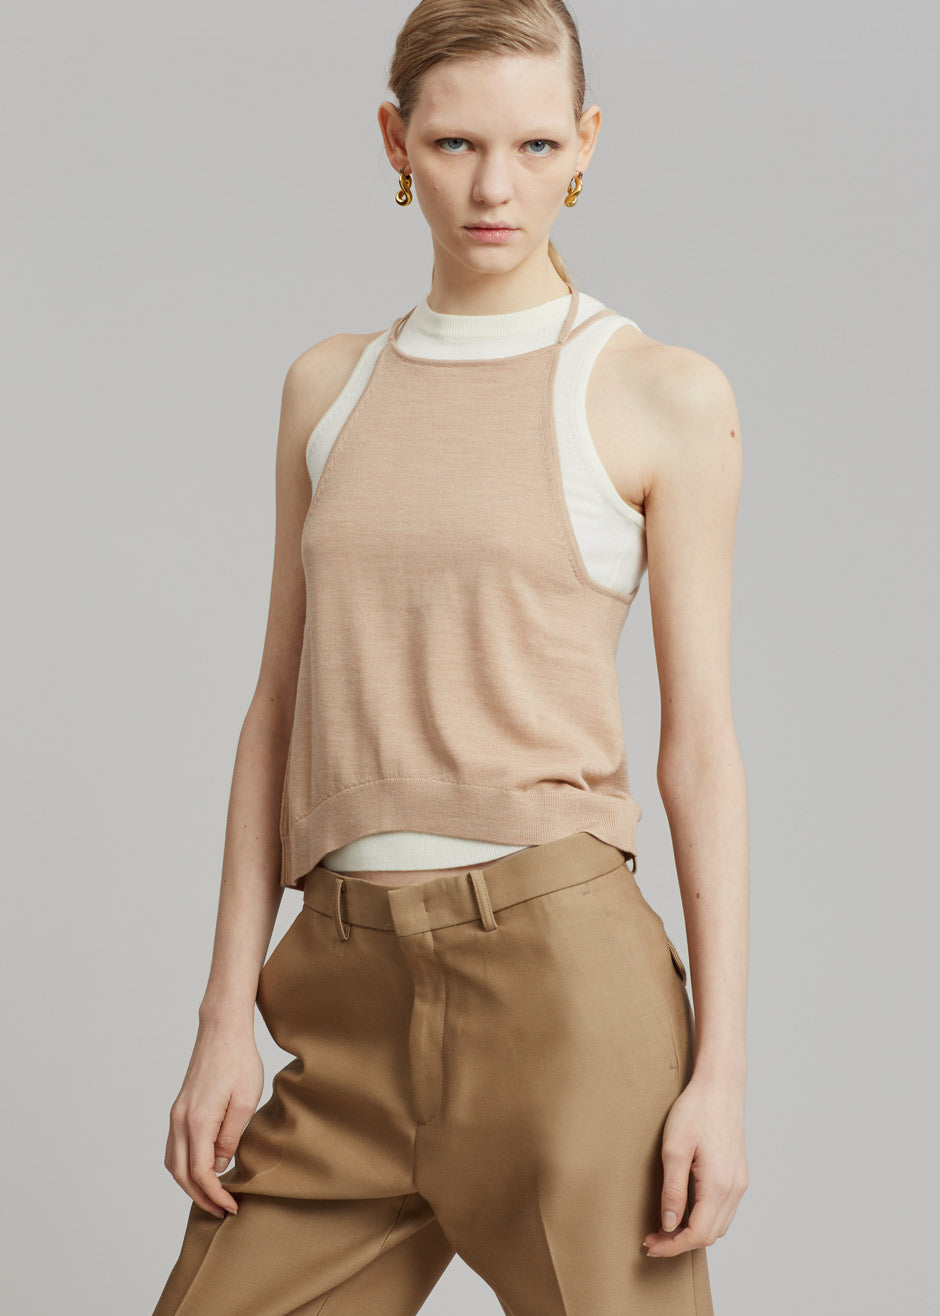 JW Anderson Layered Tank Top - White/Beige - 8